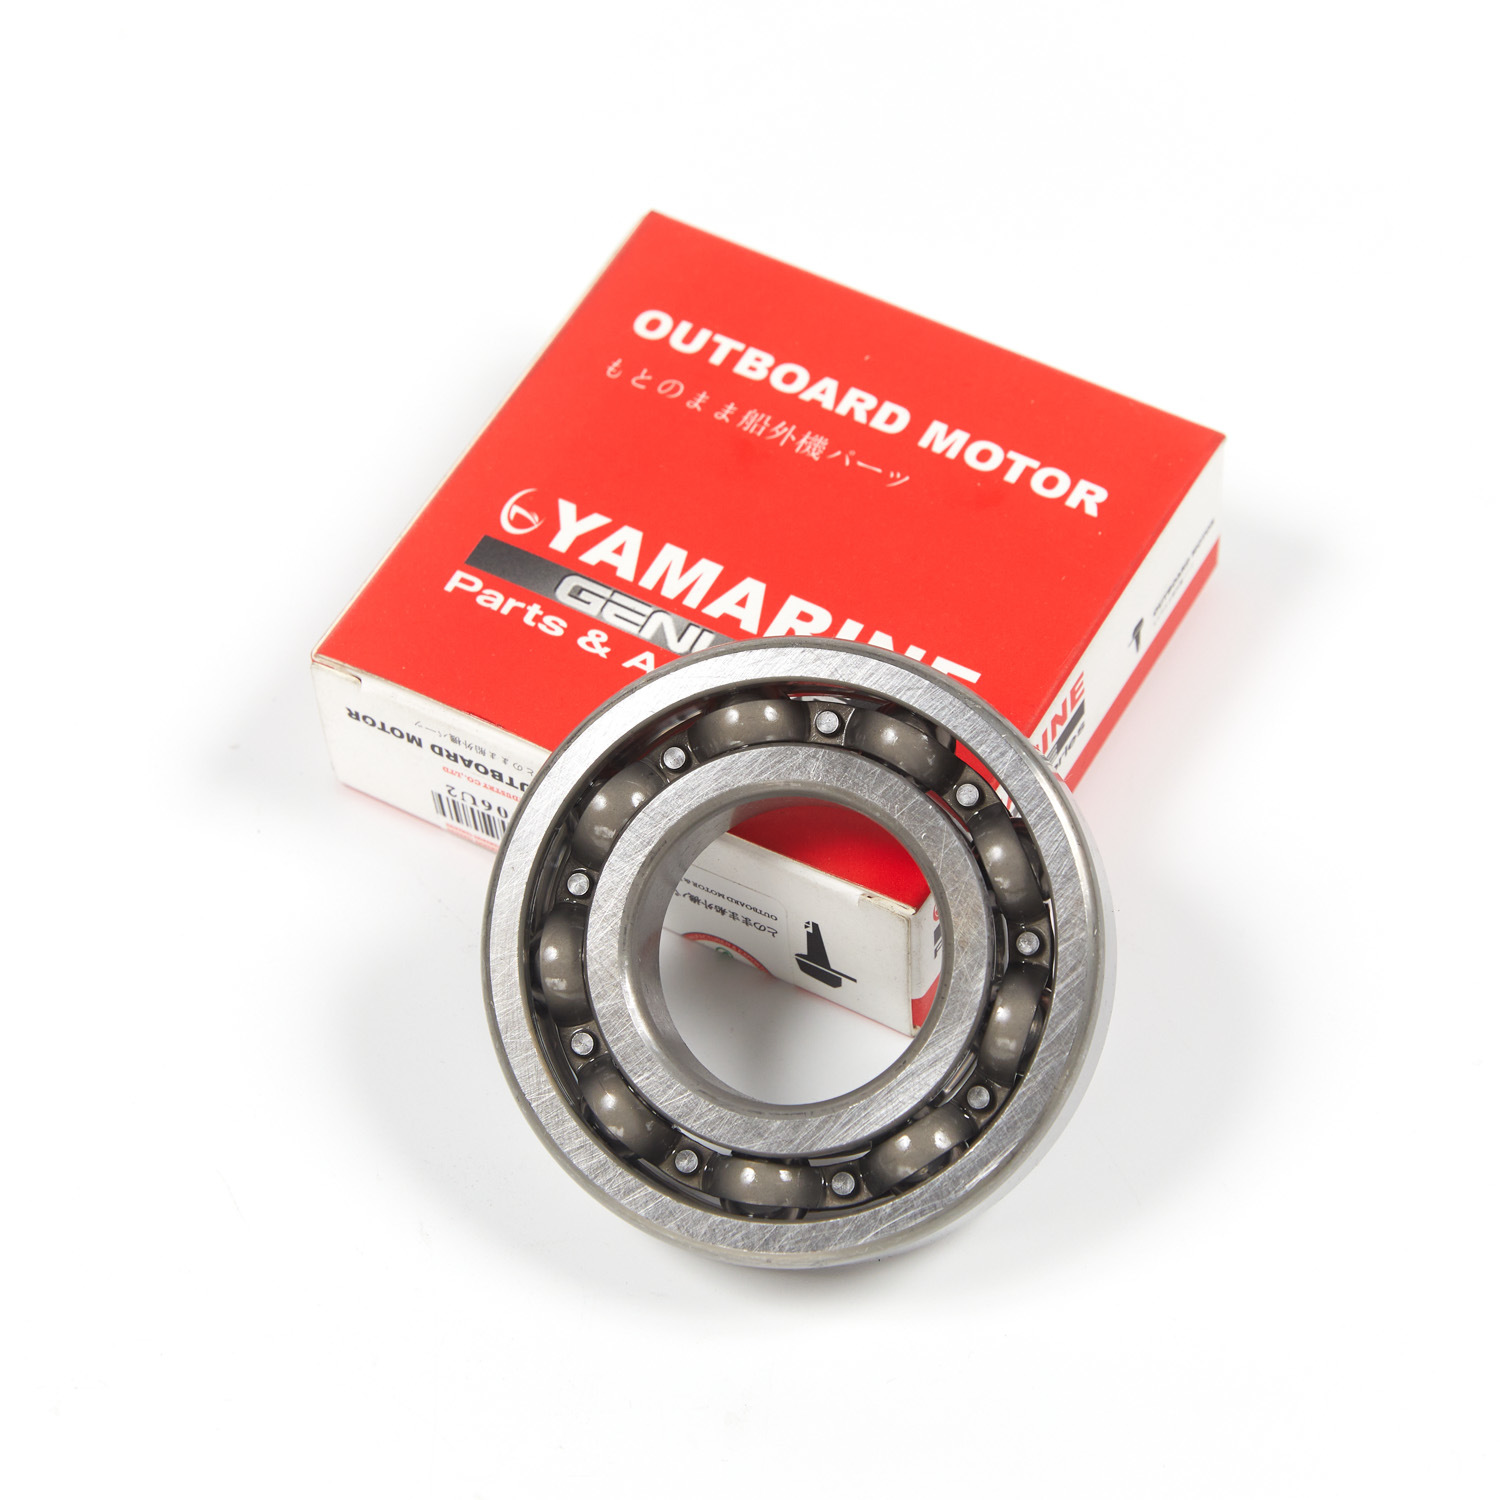 Yamarine Outboard Reverse Gear Bearing 93306-207u0, 6207c3 Fit for YAMAHA 60HP, 75/85HP Outboard Engine